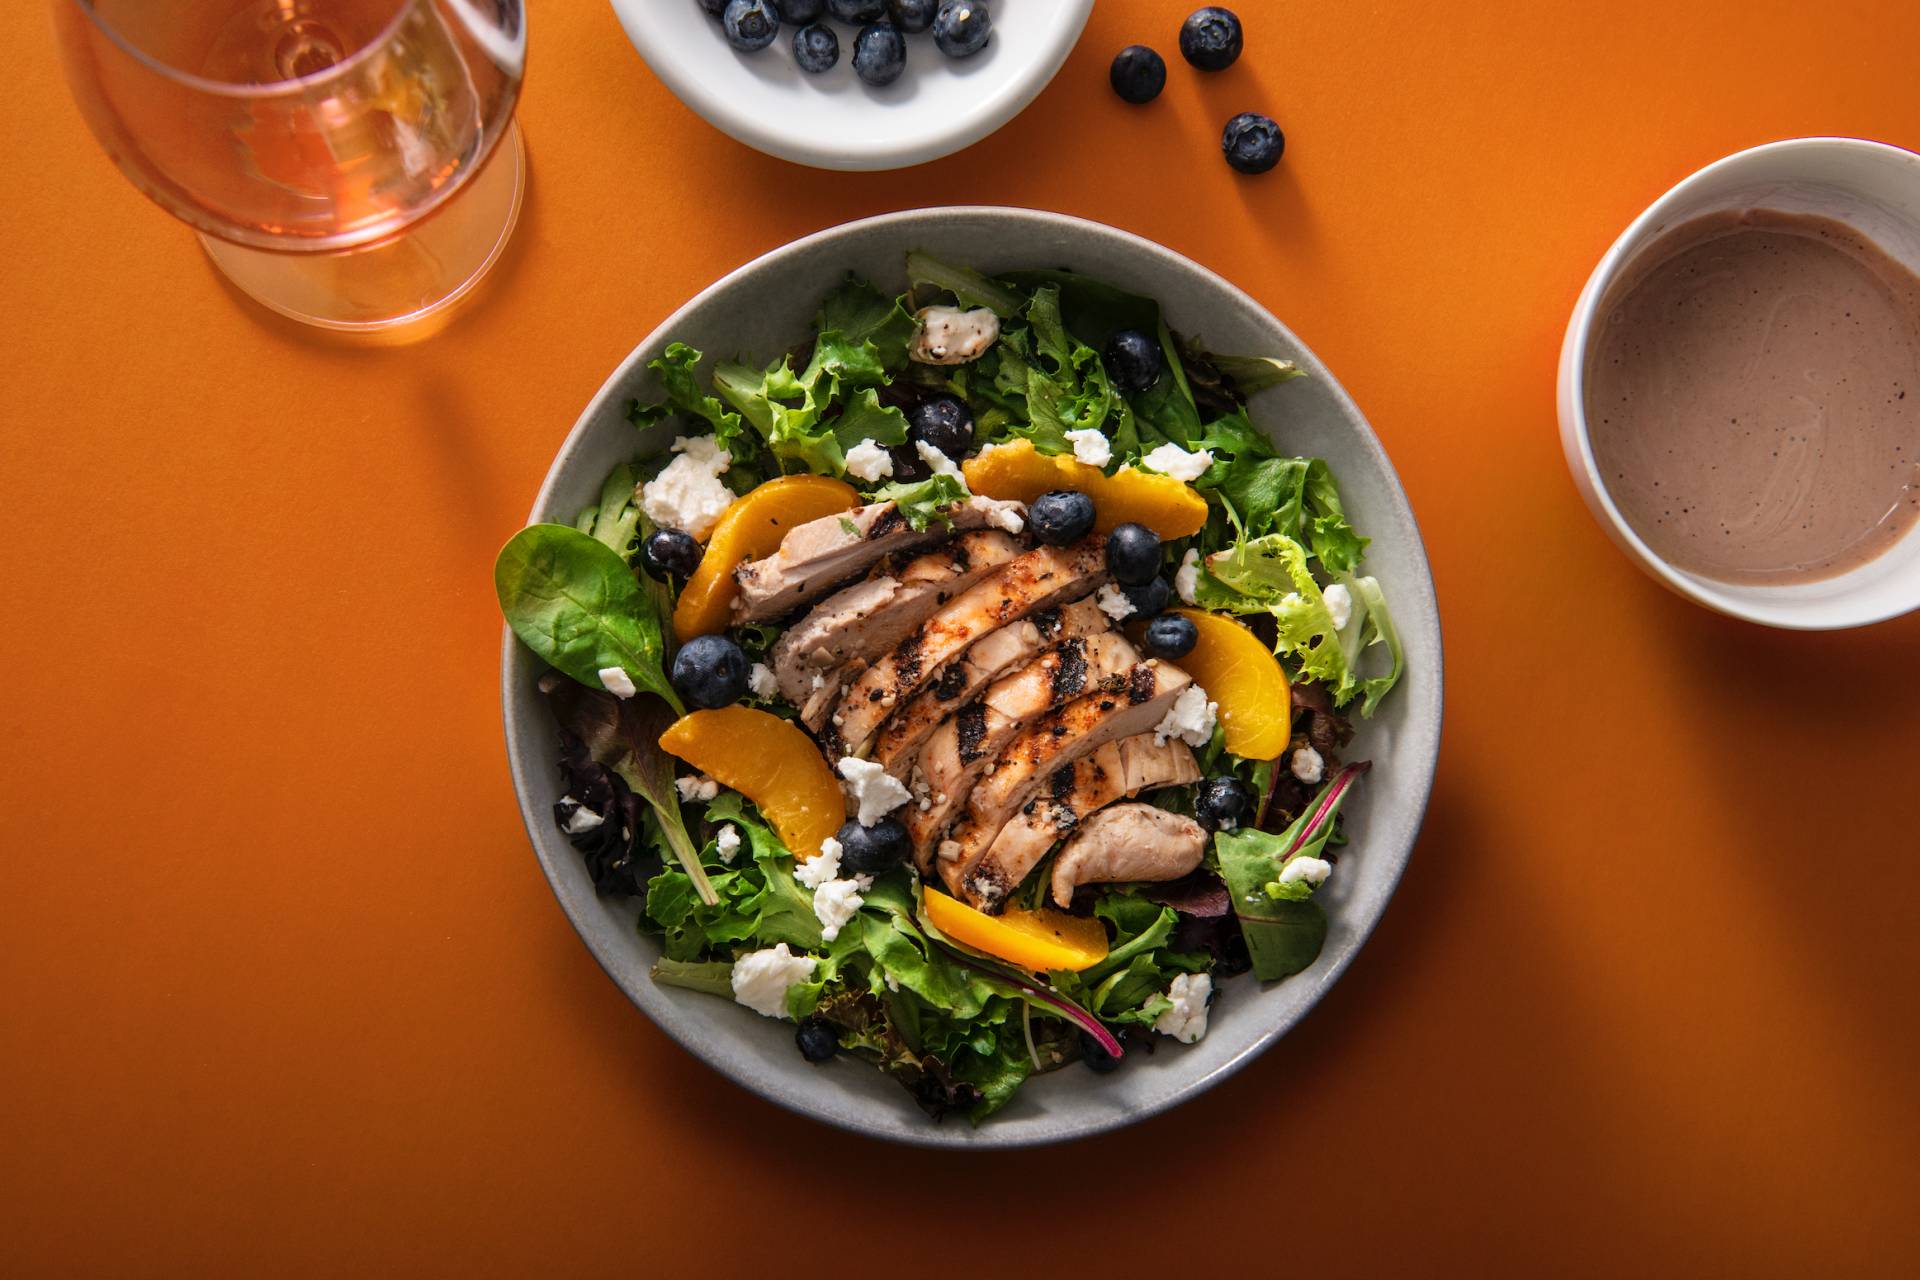 Grilled Chicken Mixed Green Salad with Creamy Balsamic